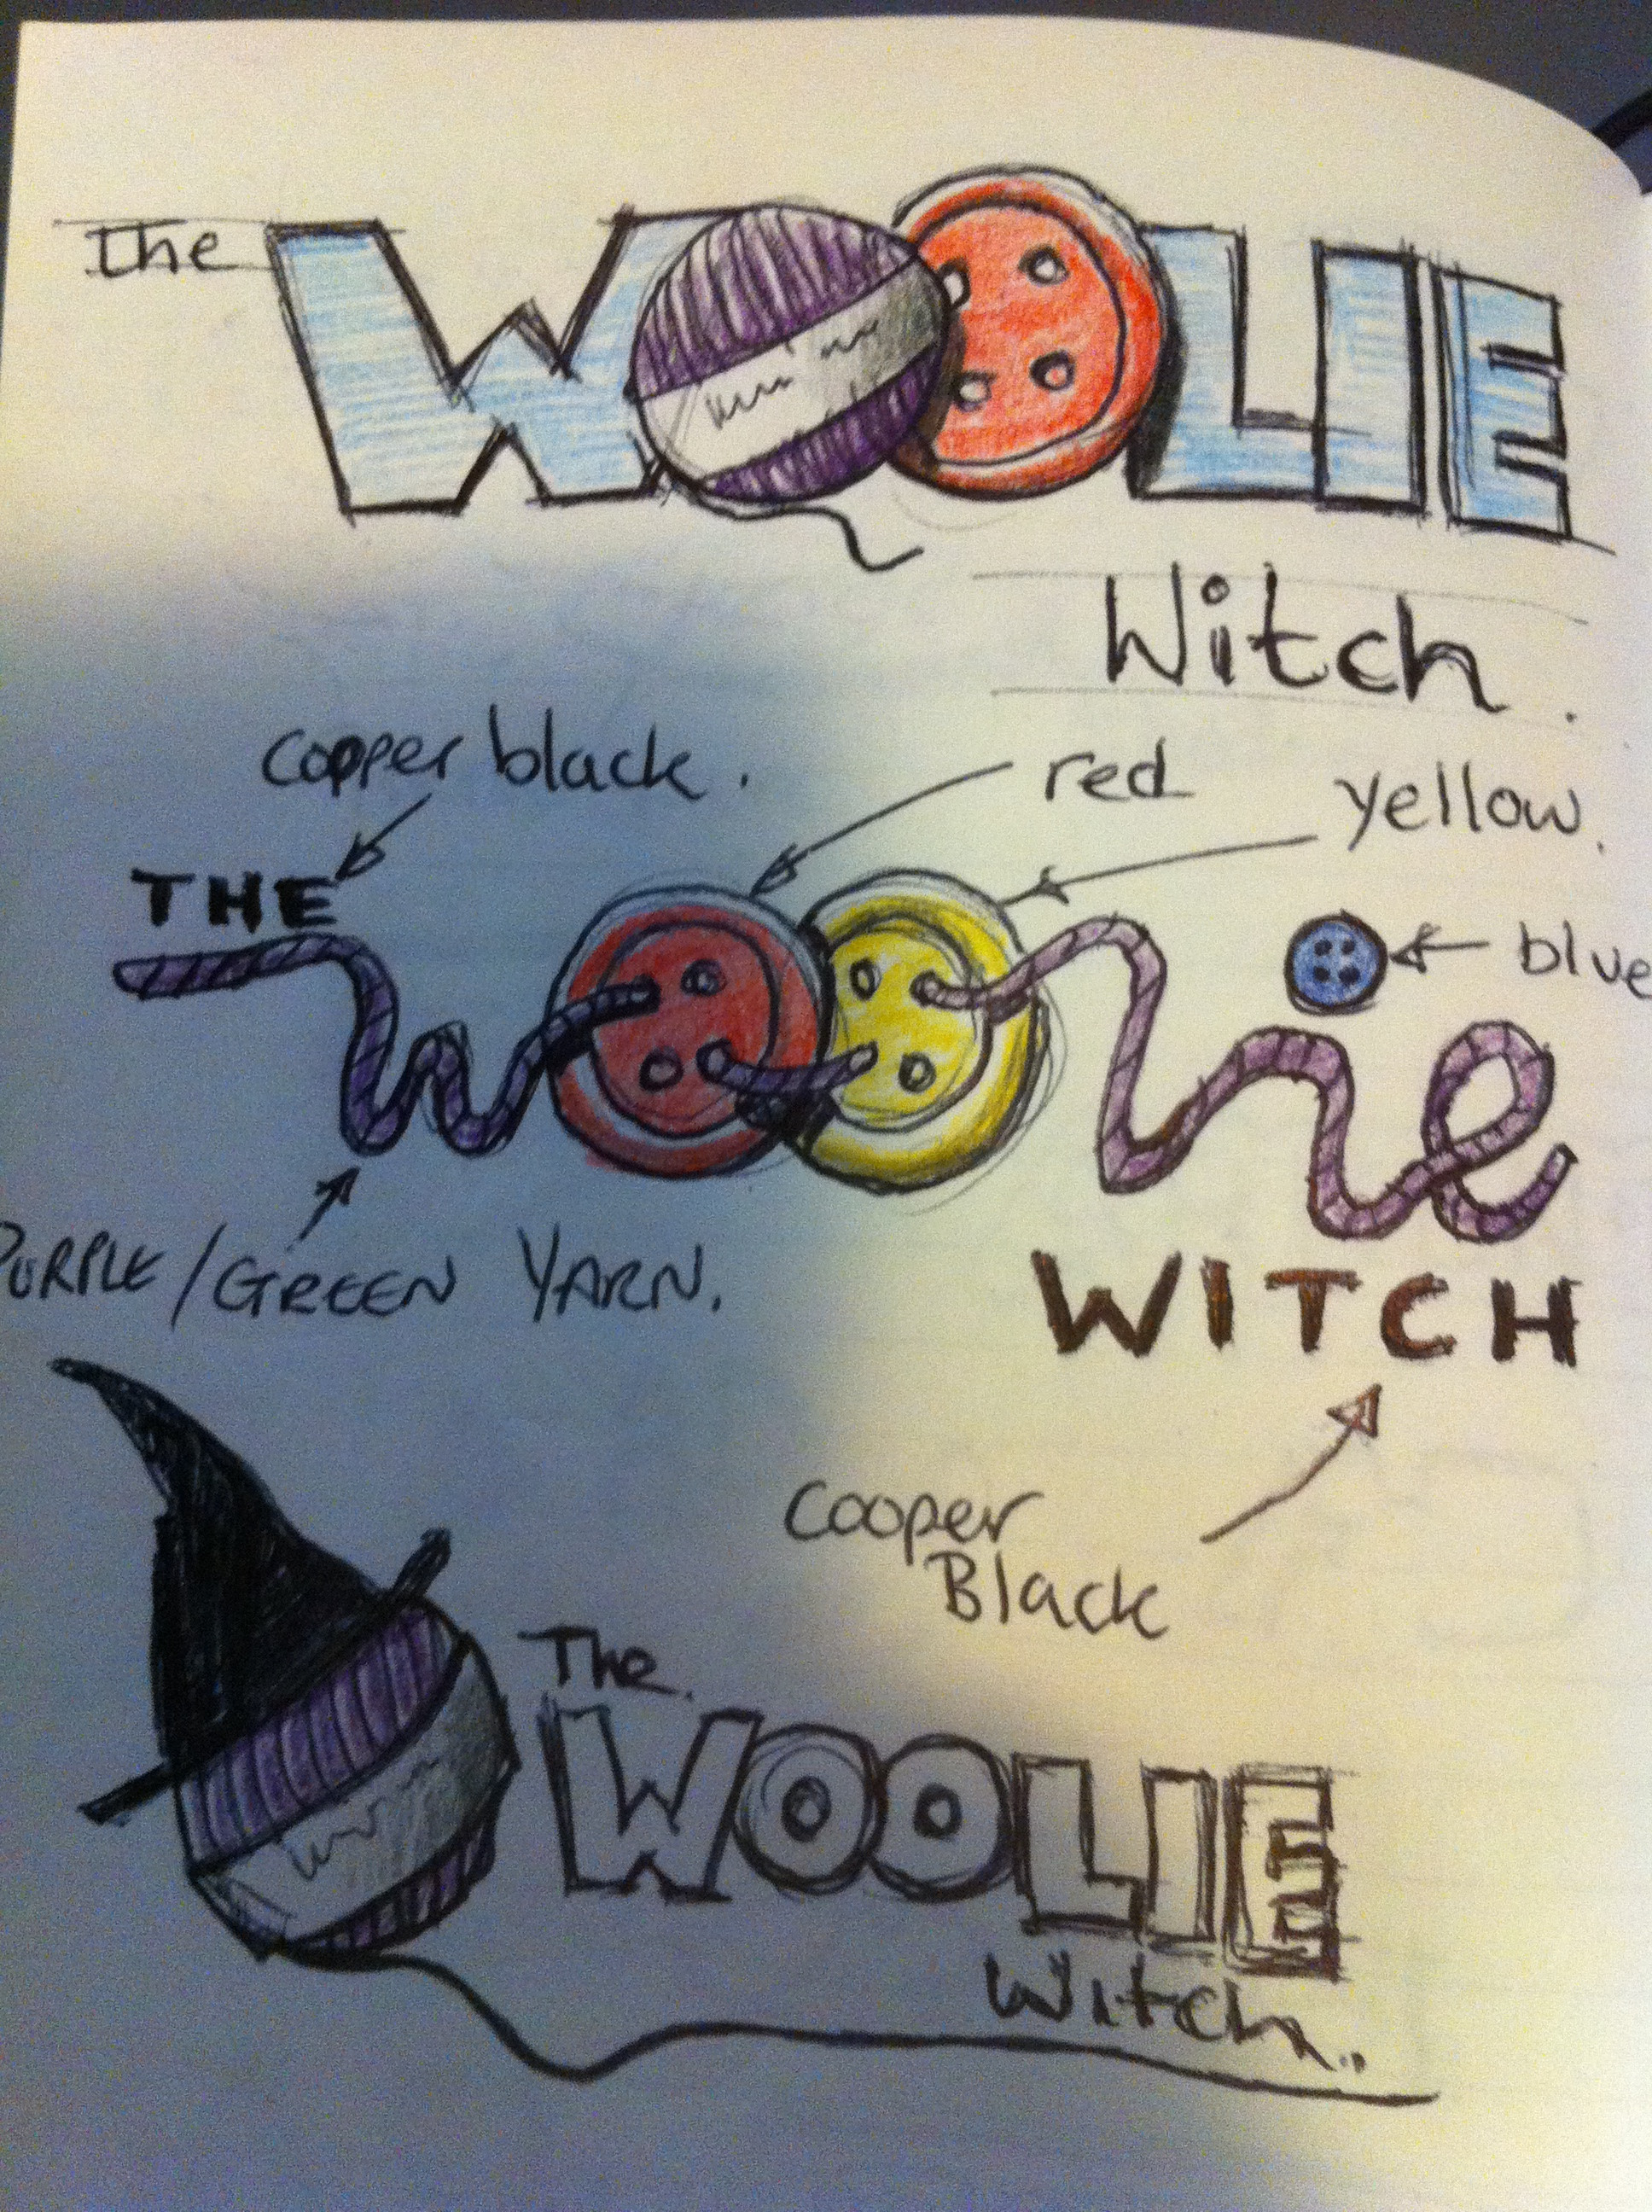 The Woolie Witch logo